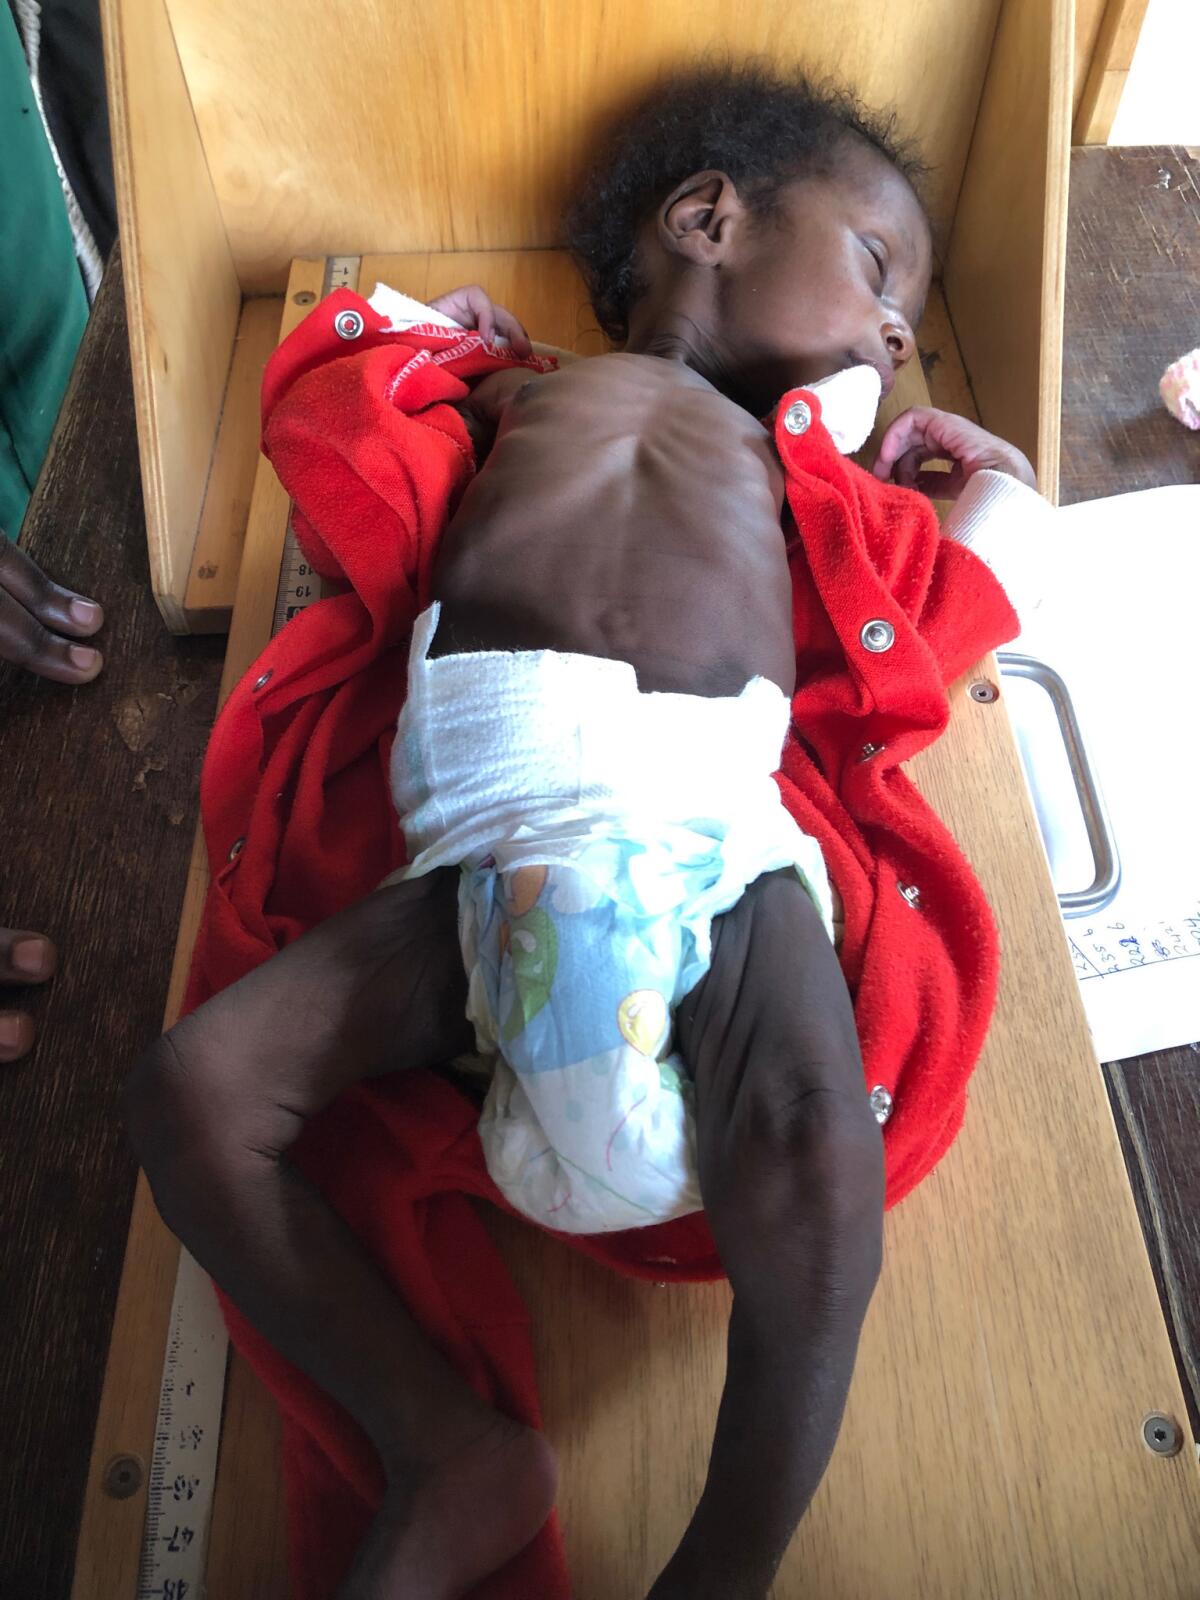 Sufiyan, a 1-month-old from an orphanage in Kaduna, Nigeria, was examined in the pediatric unit at the Barau Dikko Teaching Hospital.